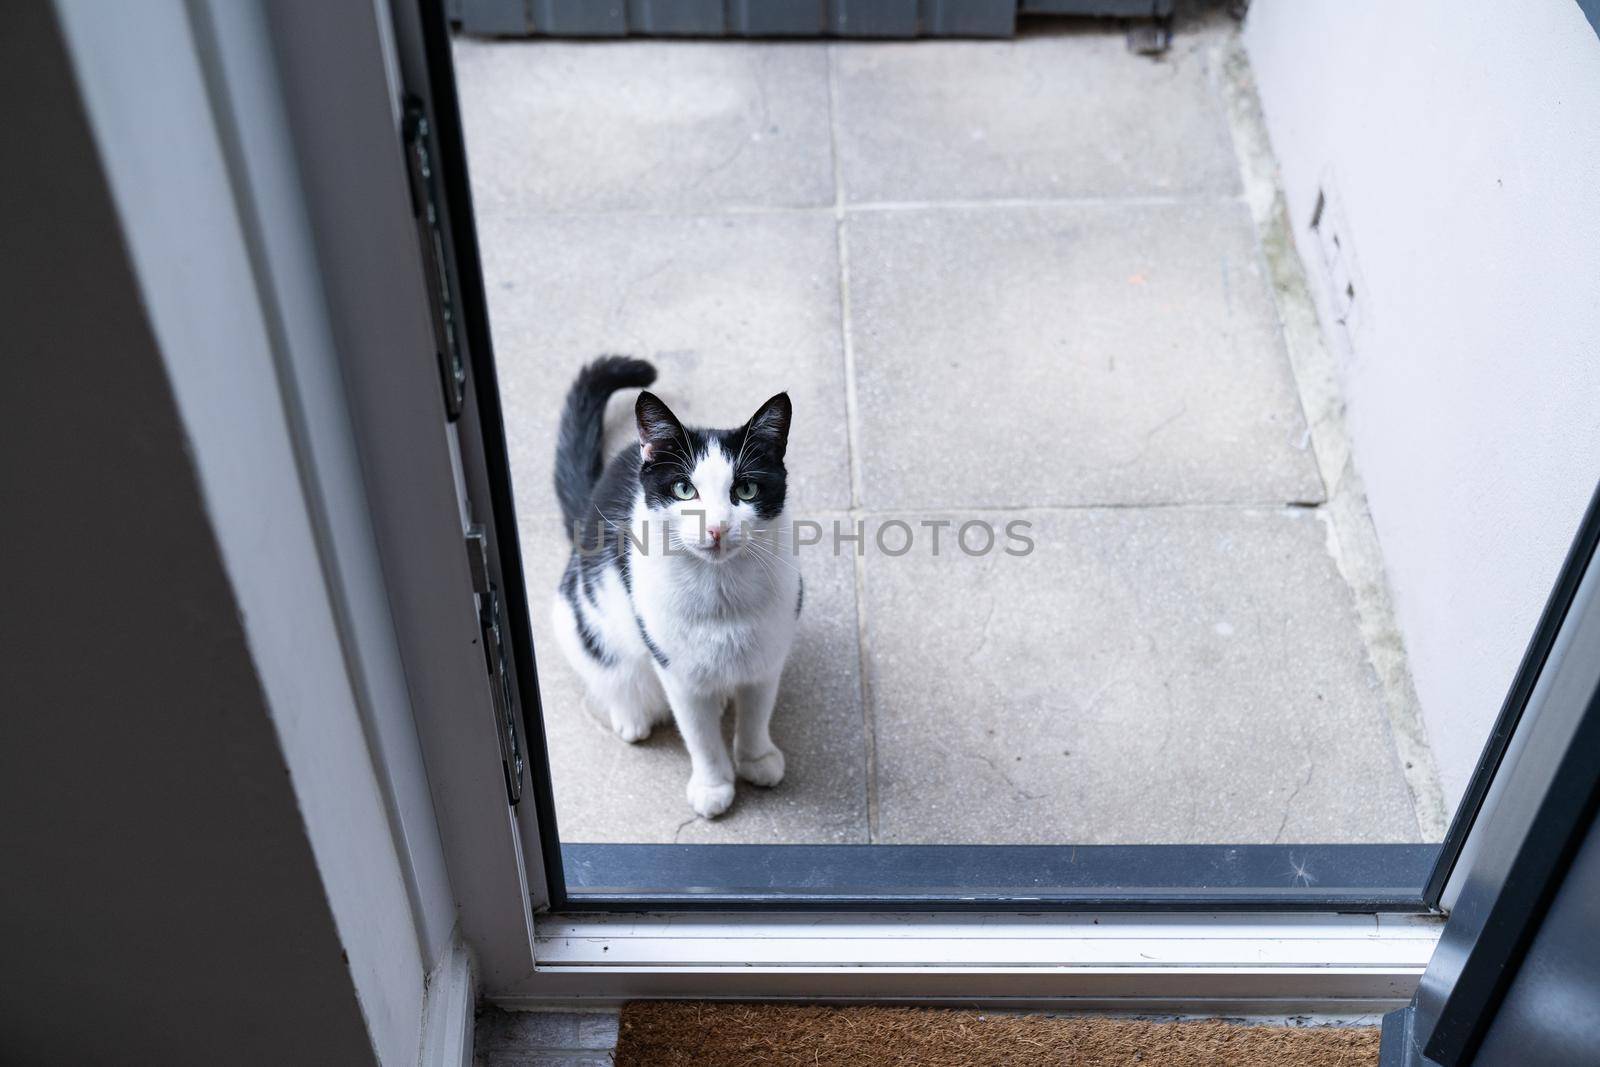 Black and white domestic cat sitting on the doorstep in front of the kitchendoor, waiting and asking to be let in